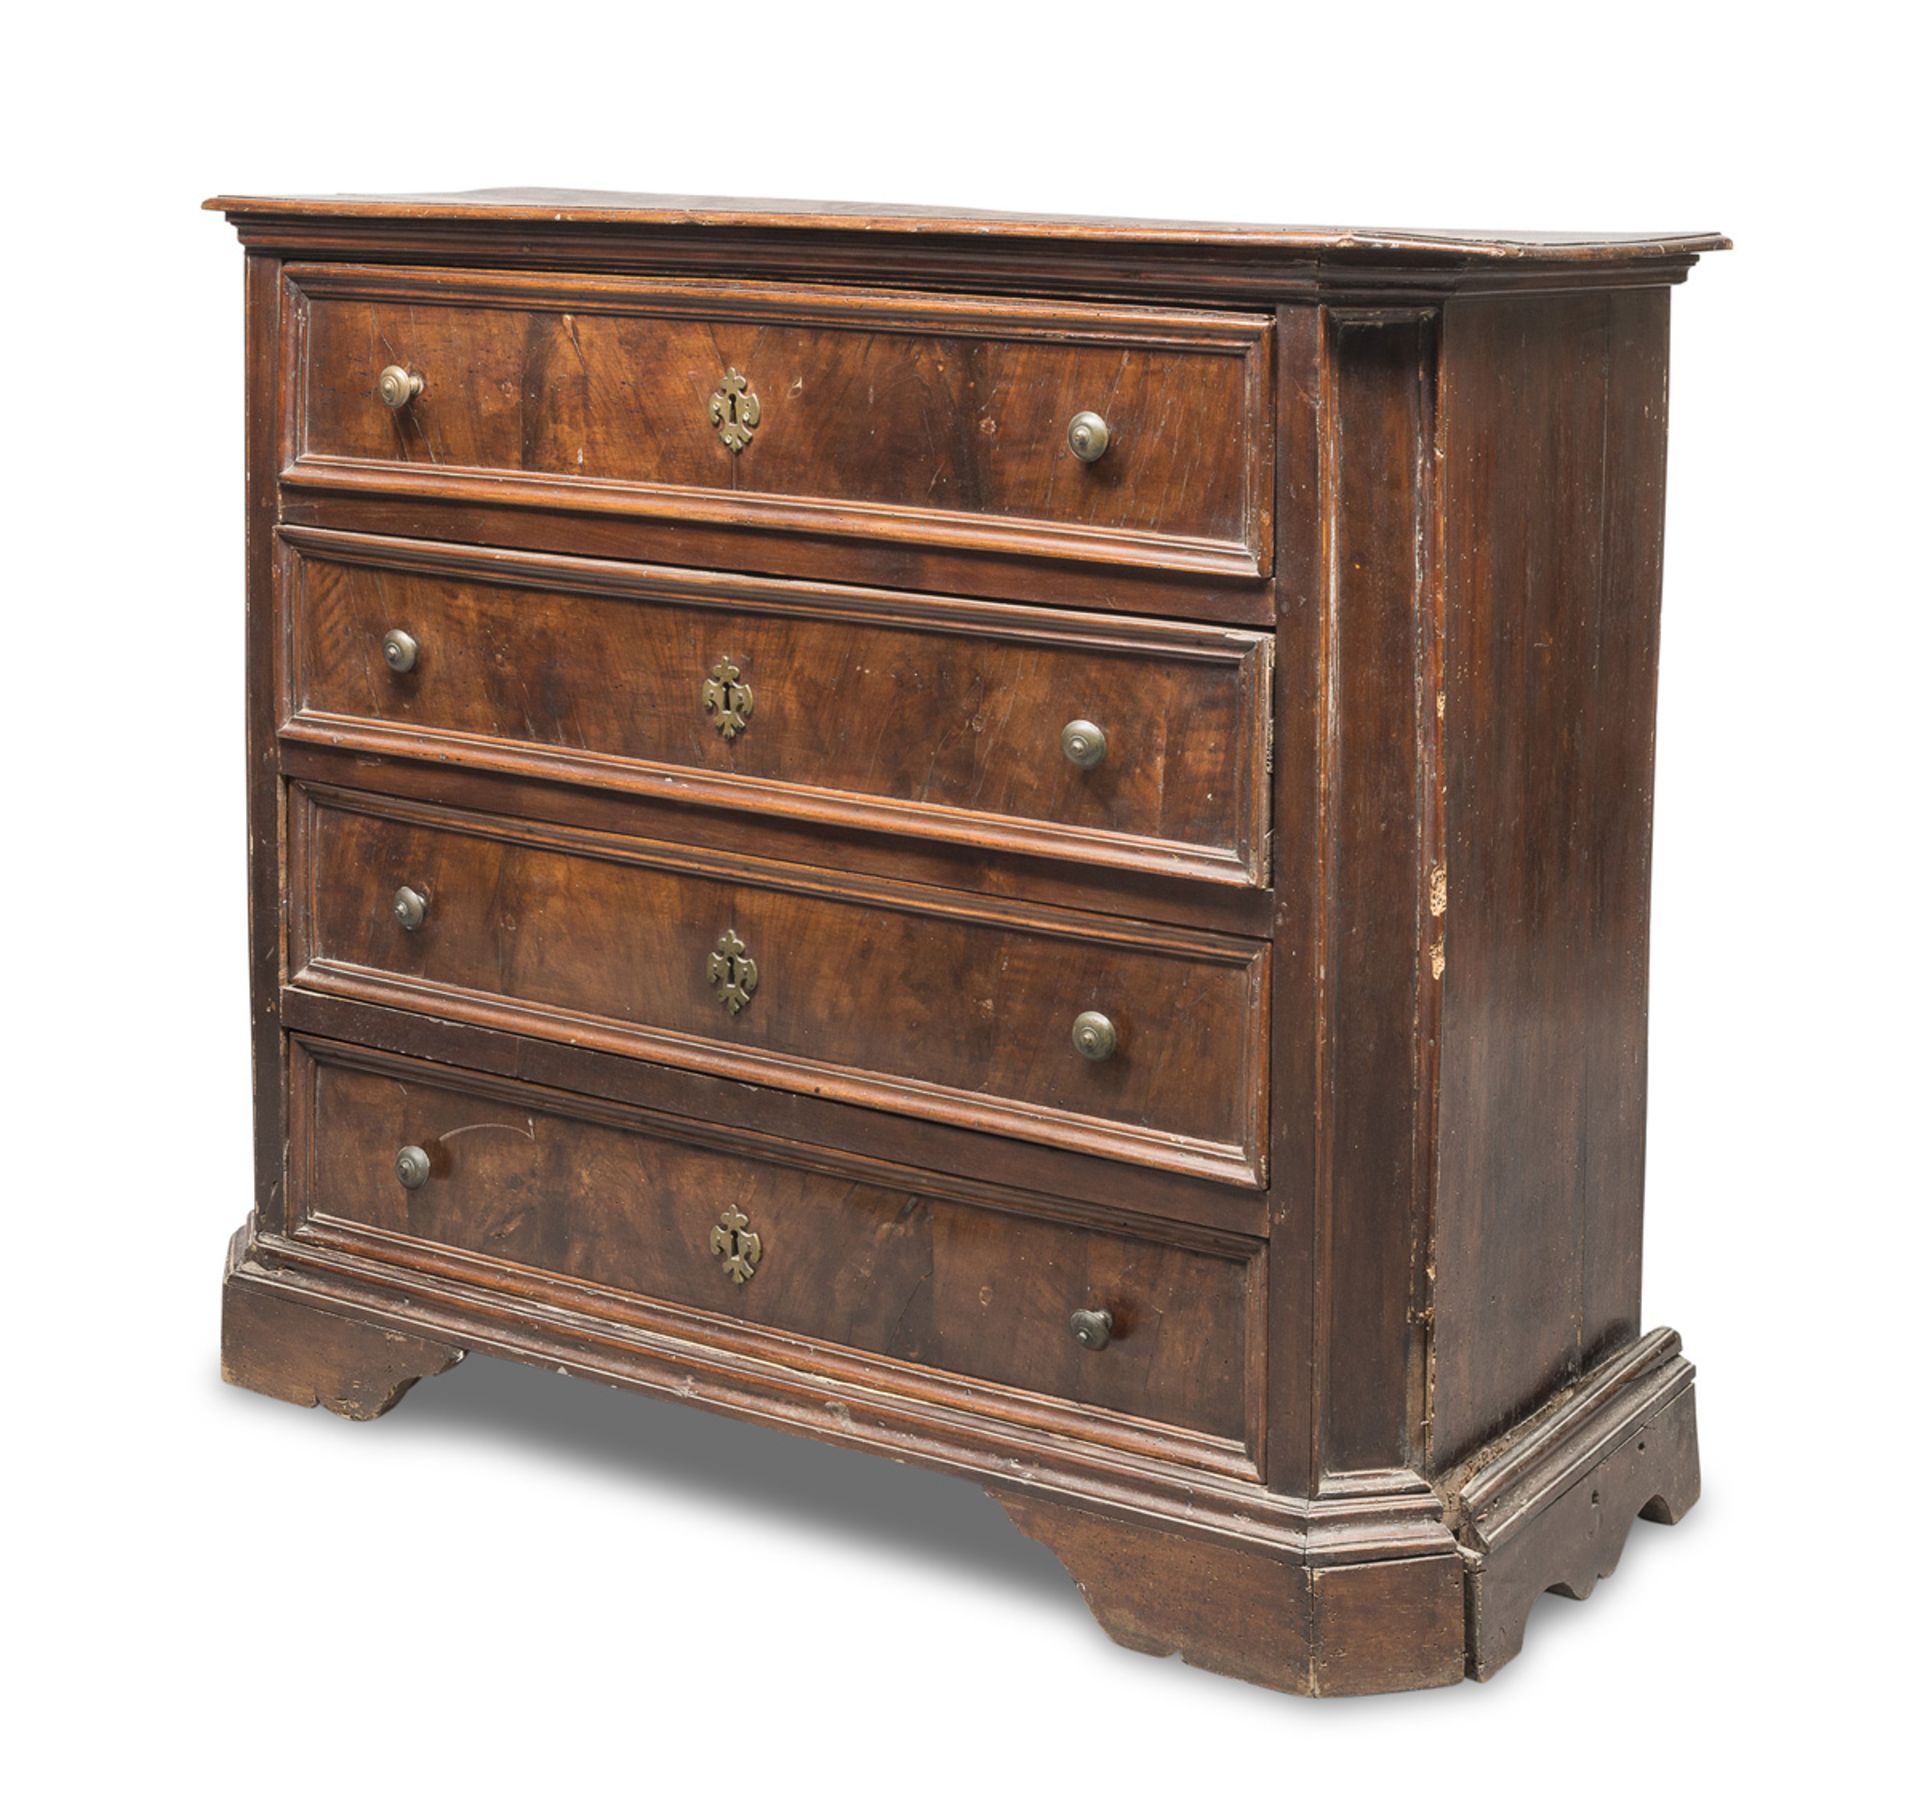 CHEST OF DRAWERS IN WALNUT CENTRAL ITALY LATE 17TH CENTURY